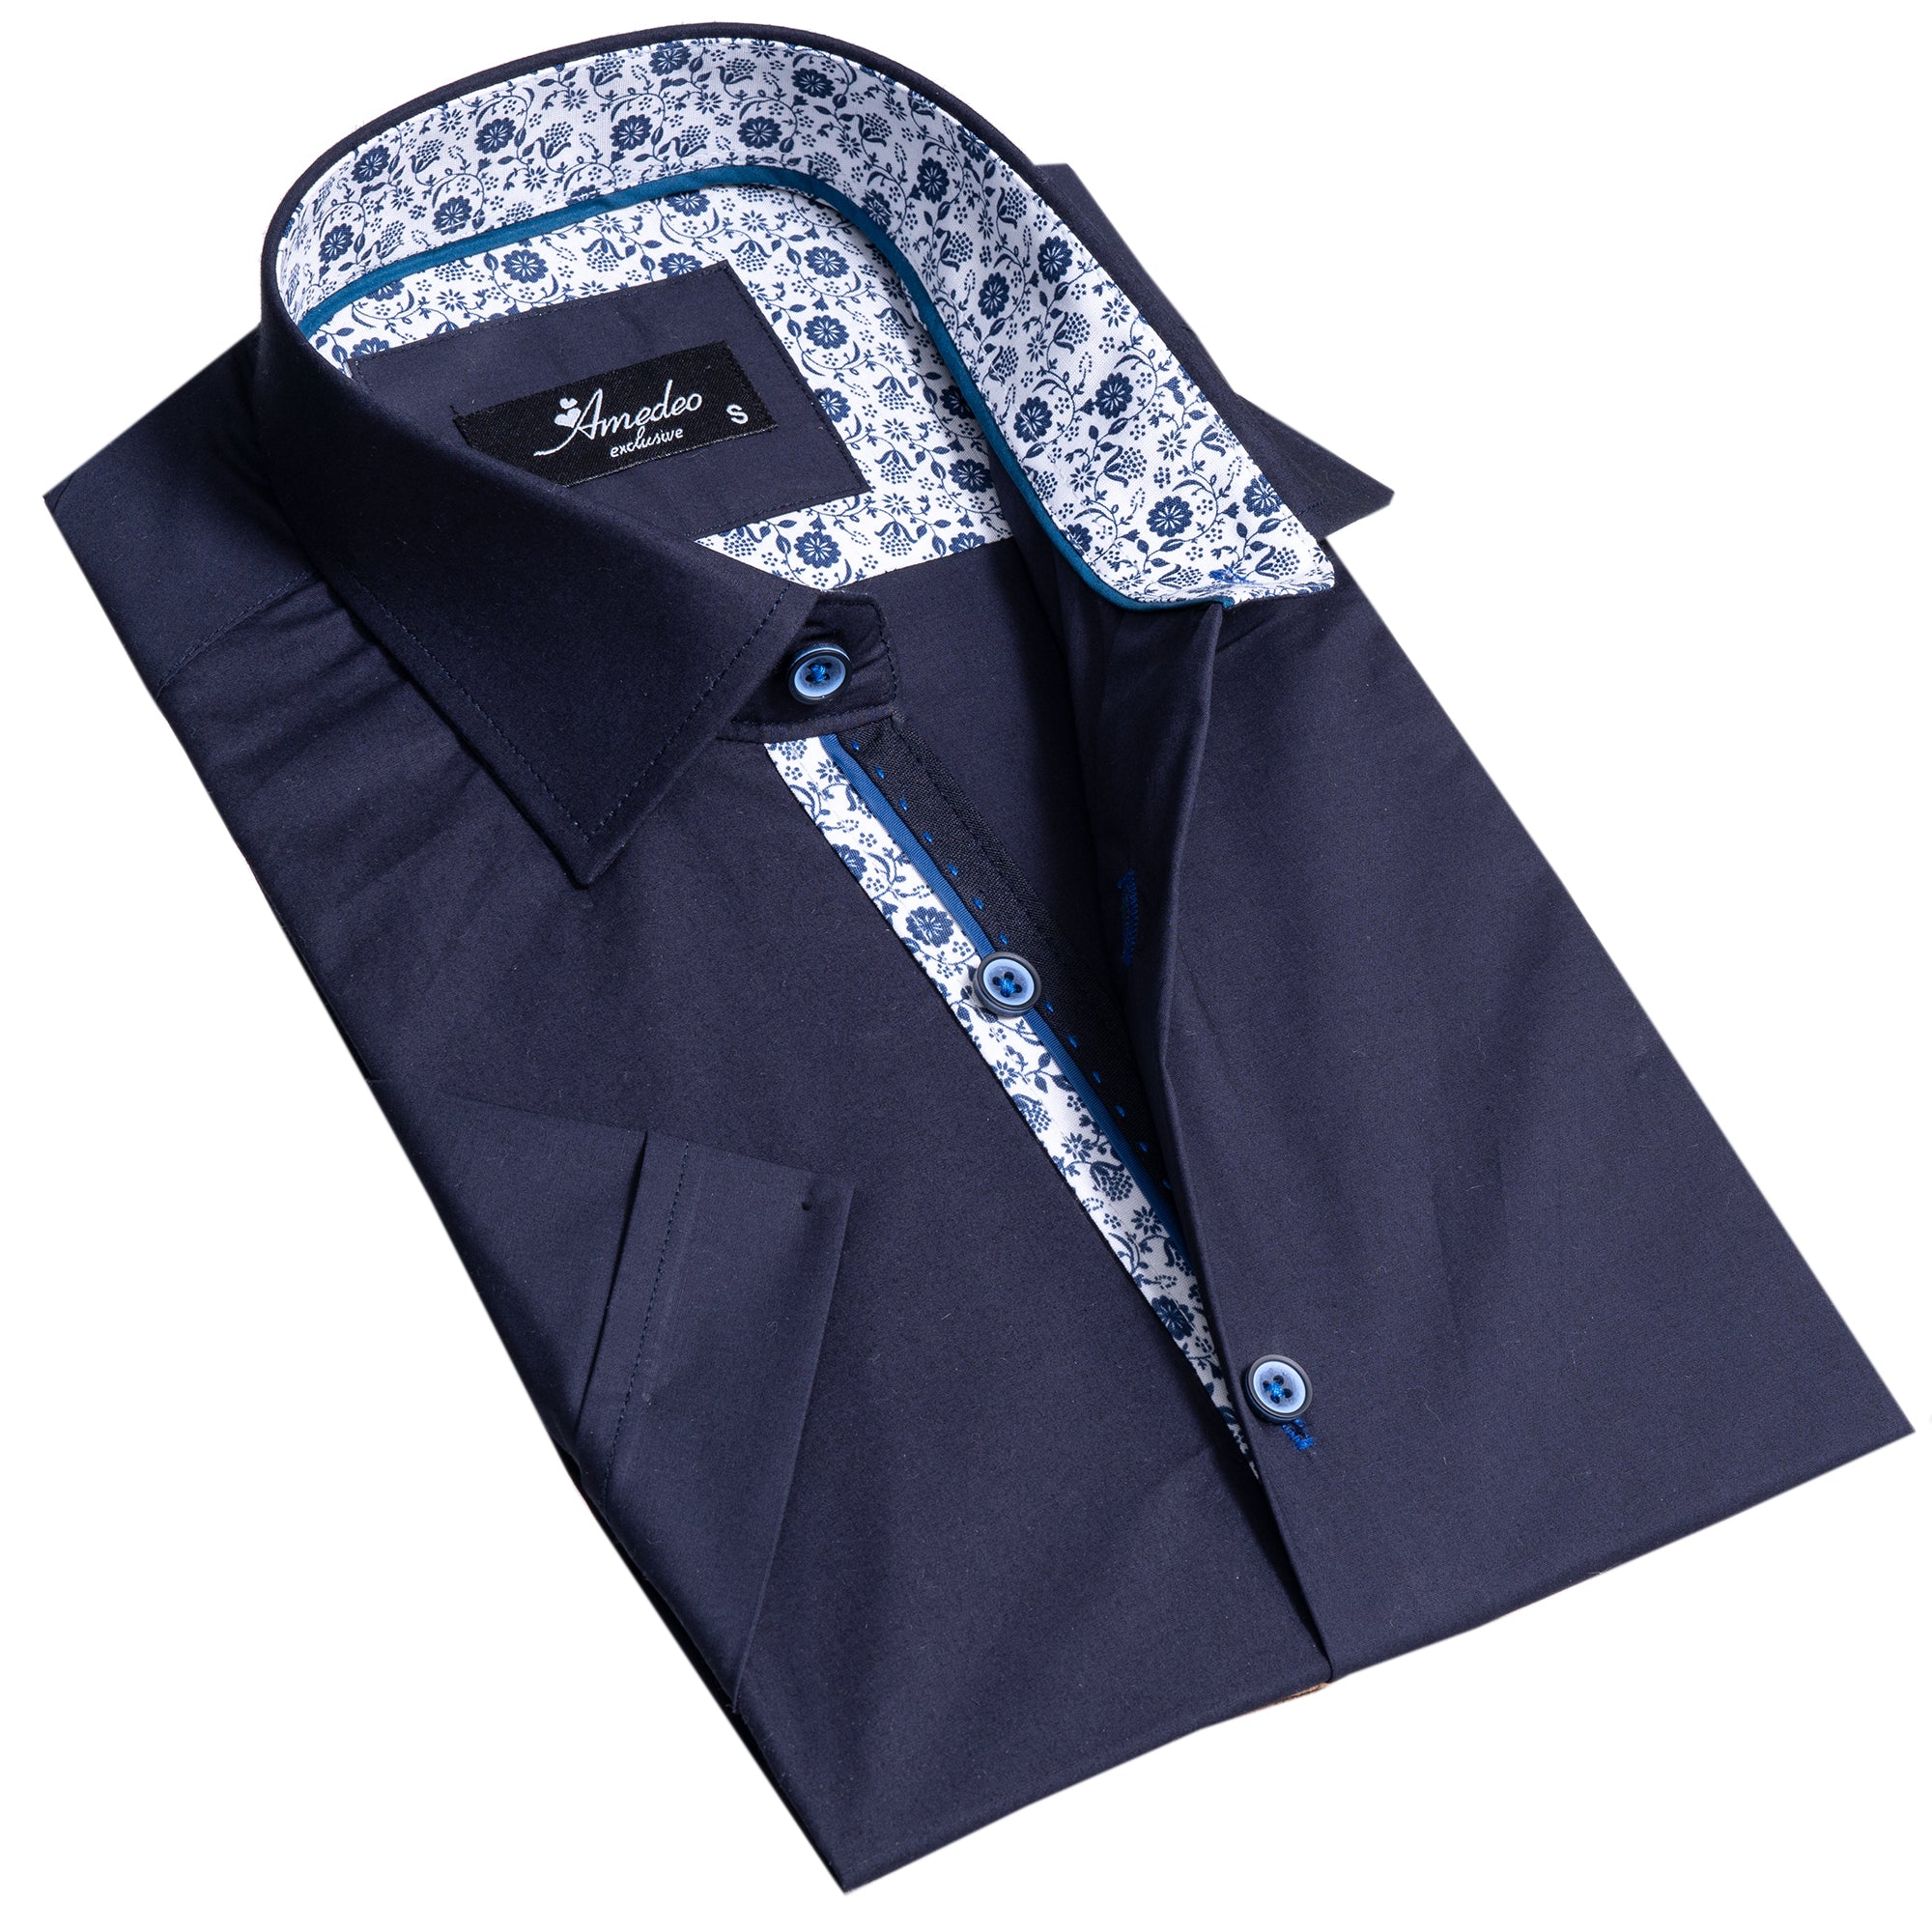 Midnight Blue Mens Short Sleeve Button up Shirts - Tailored Slim Fit Cotton Dress Shirts